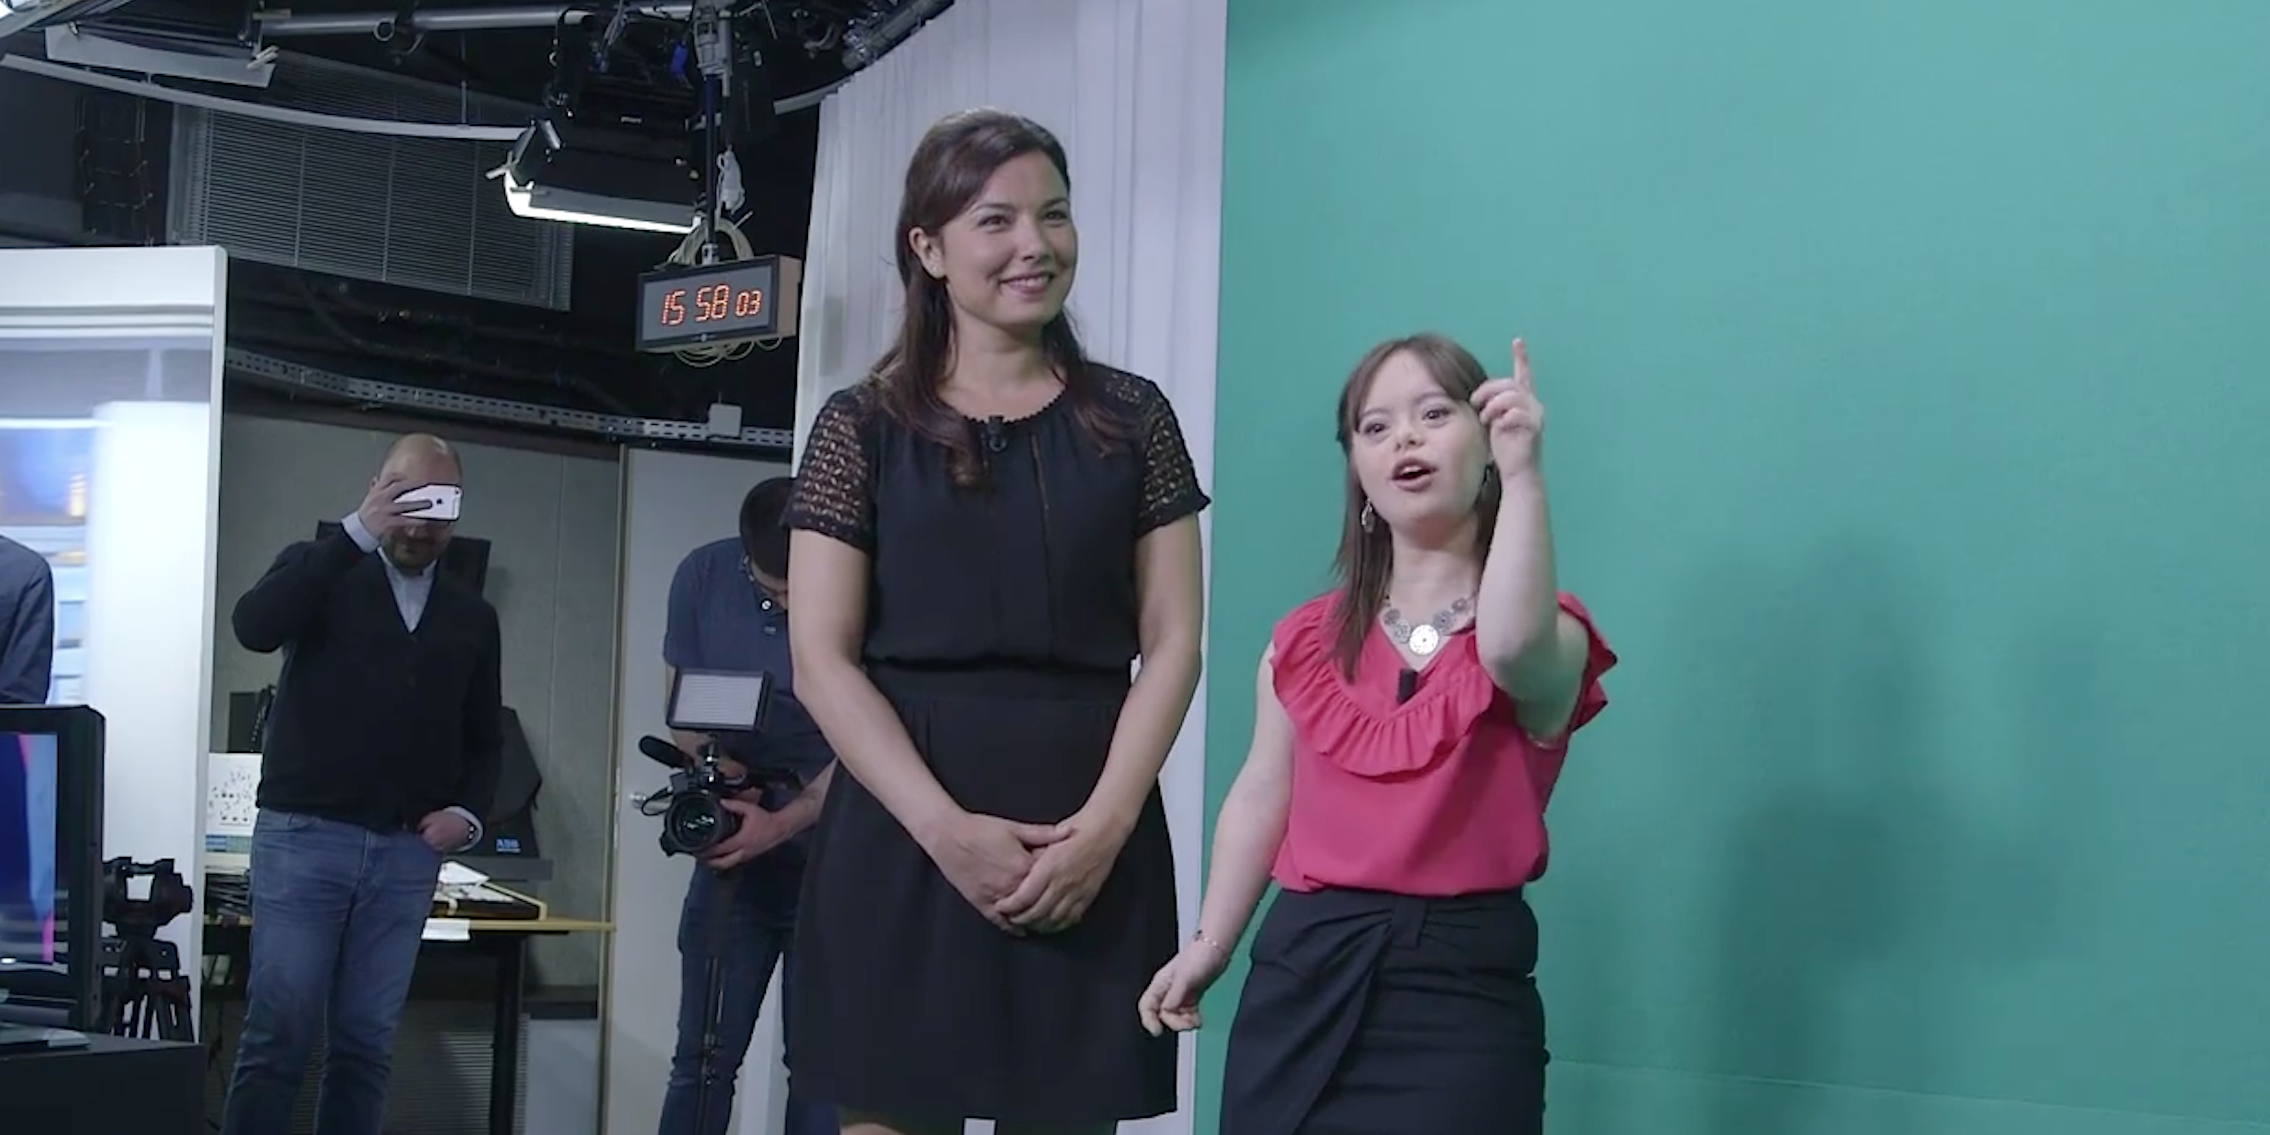 21-year-old Melanie Segard stands next to a green screen as she fulfills her lifelong dream of presenting the weather on television.